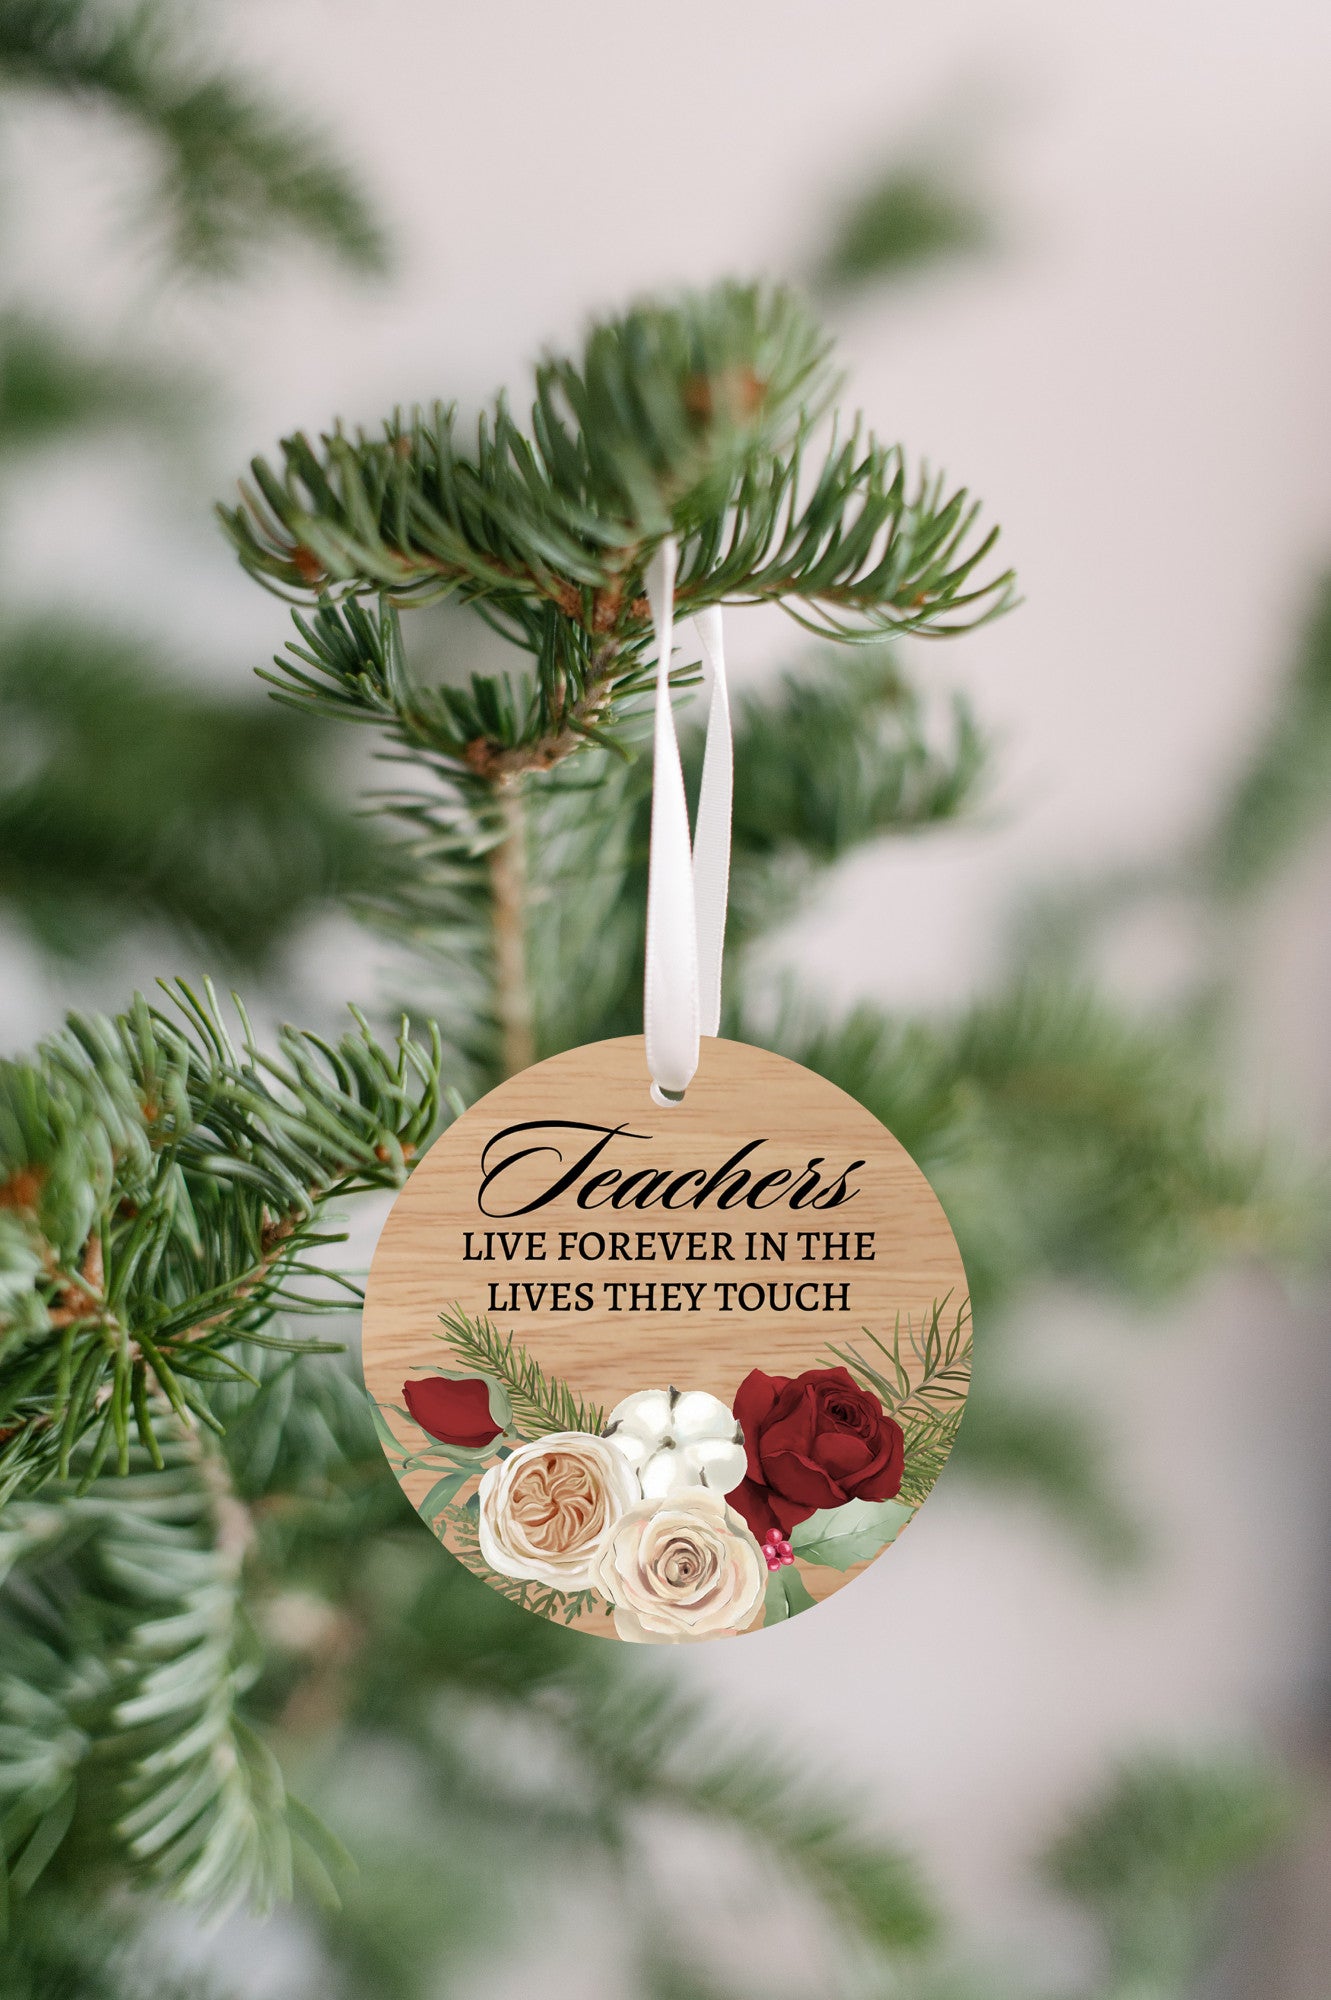 Teachers Live Forever In The Lives They Touch Ornament